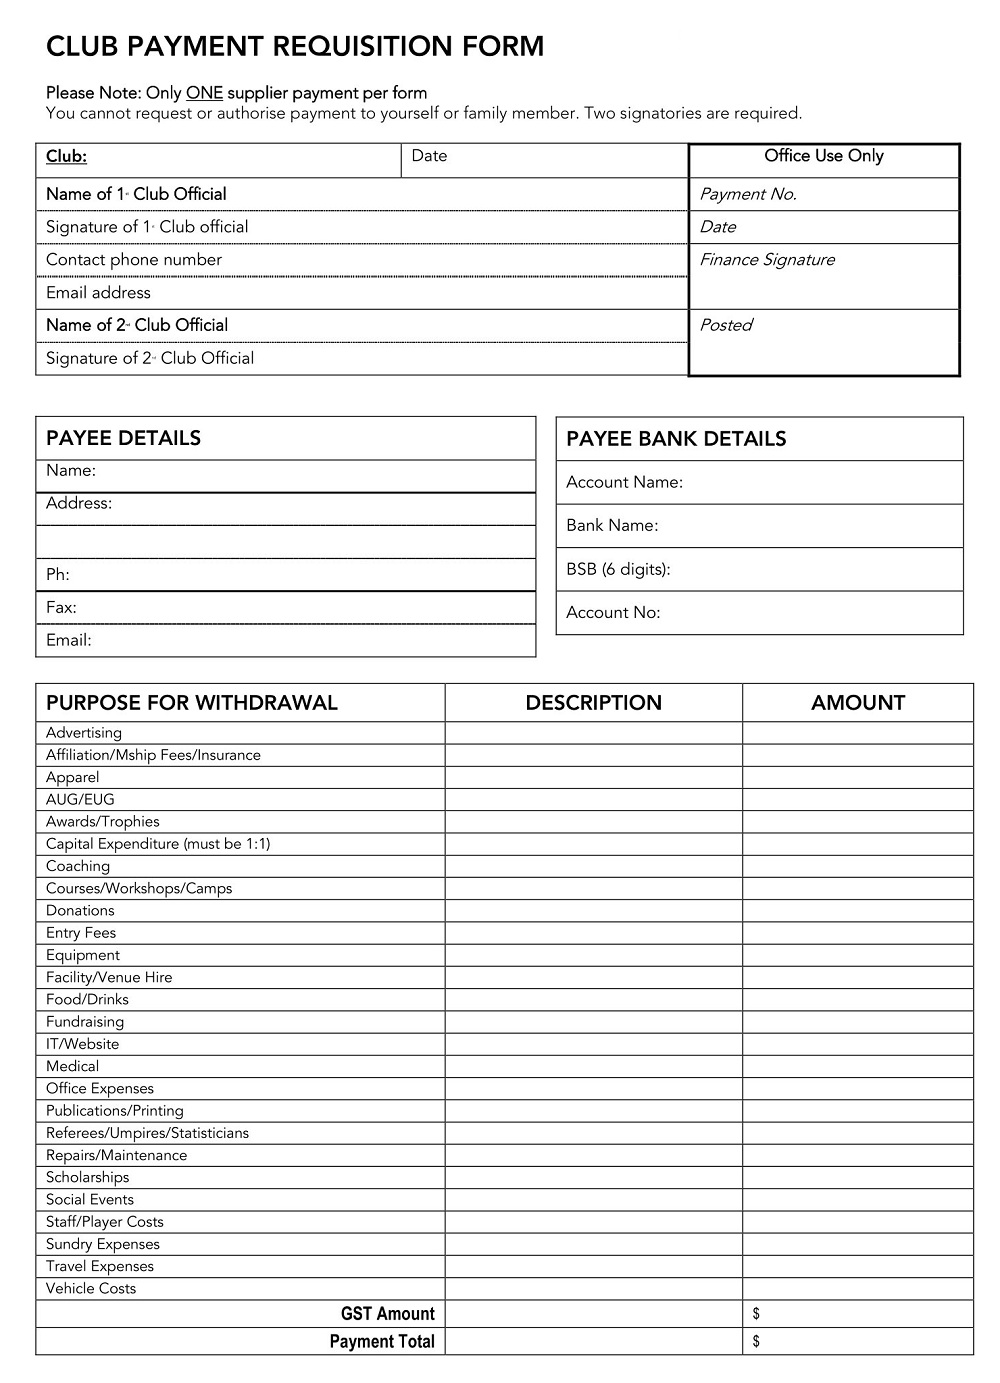 Club Payment Requisition Form